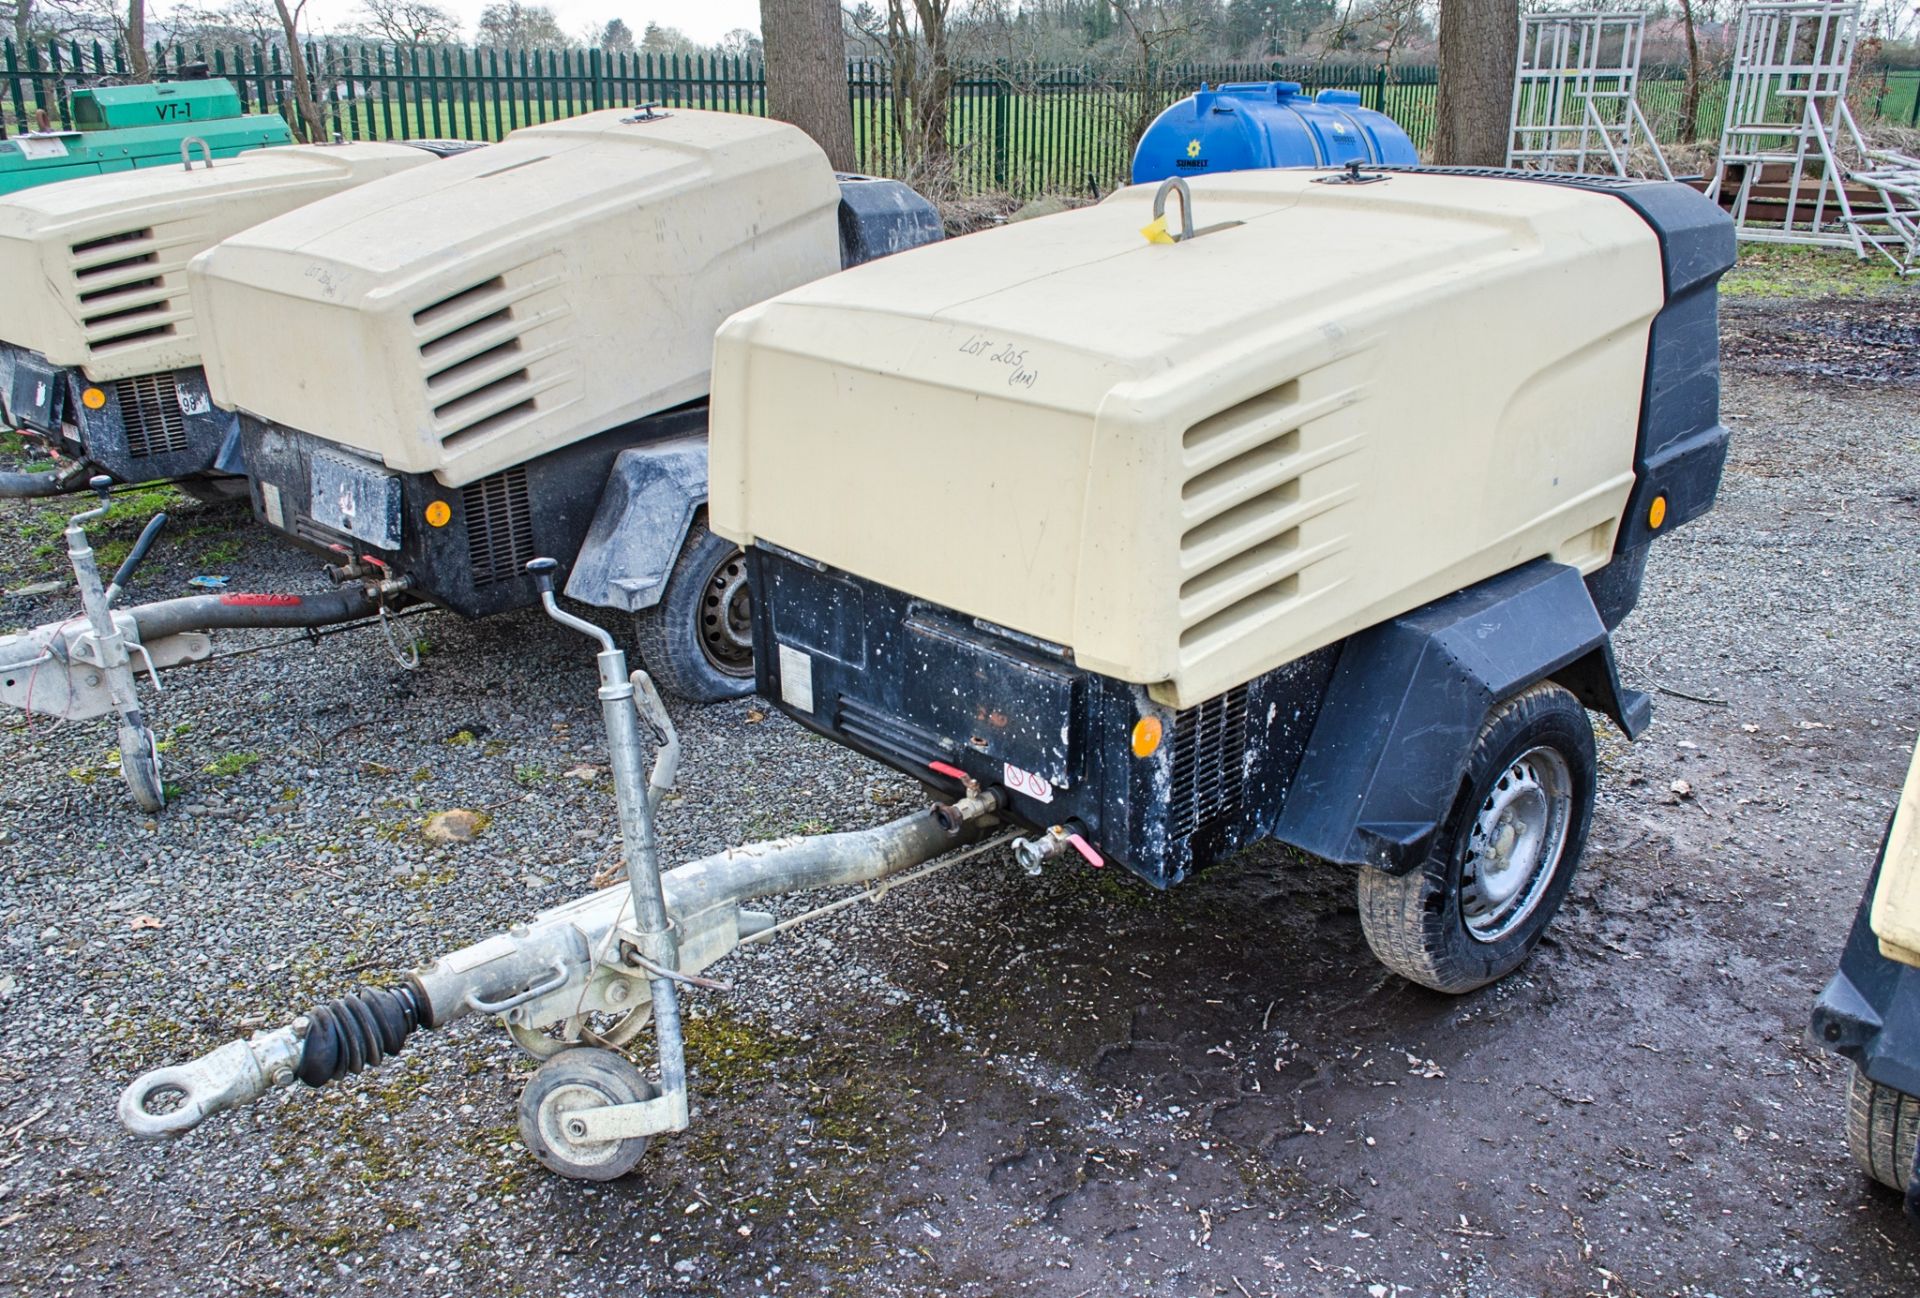 Doosan 7/41 diesel driven fast tow mobile air compressor Year: 2011 S/N: 430862 Recorded Hours: 1011